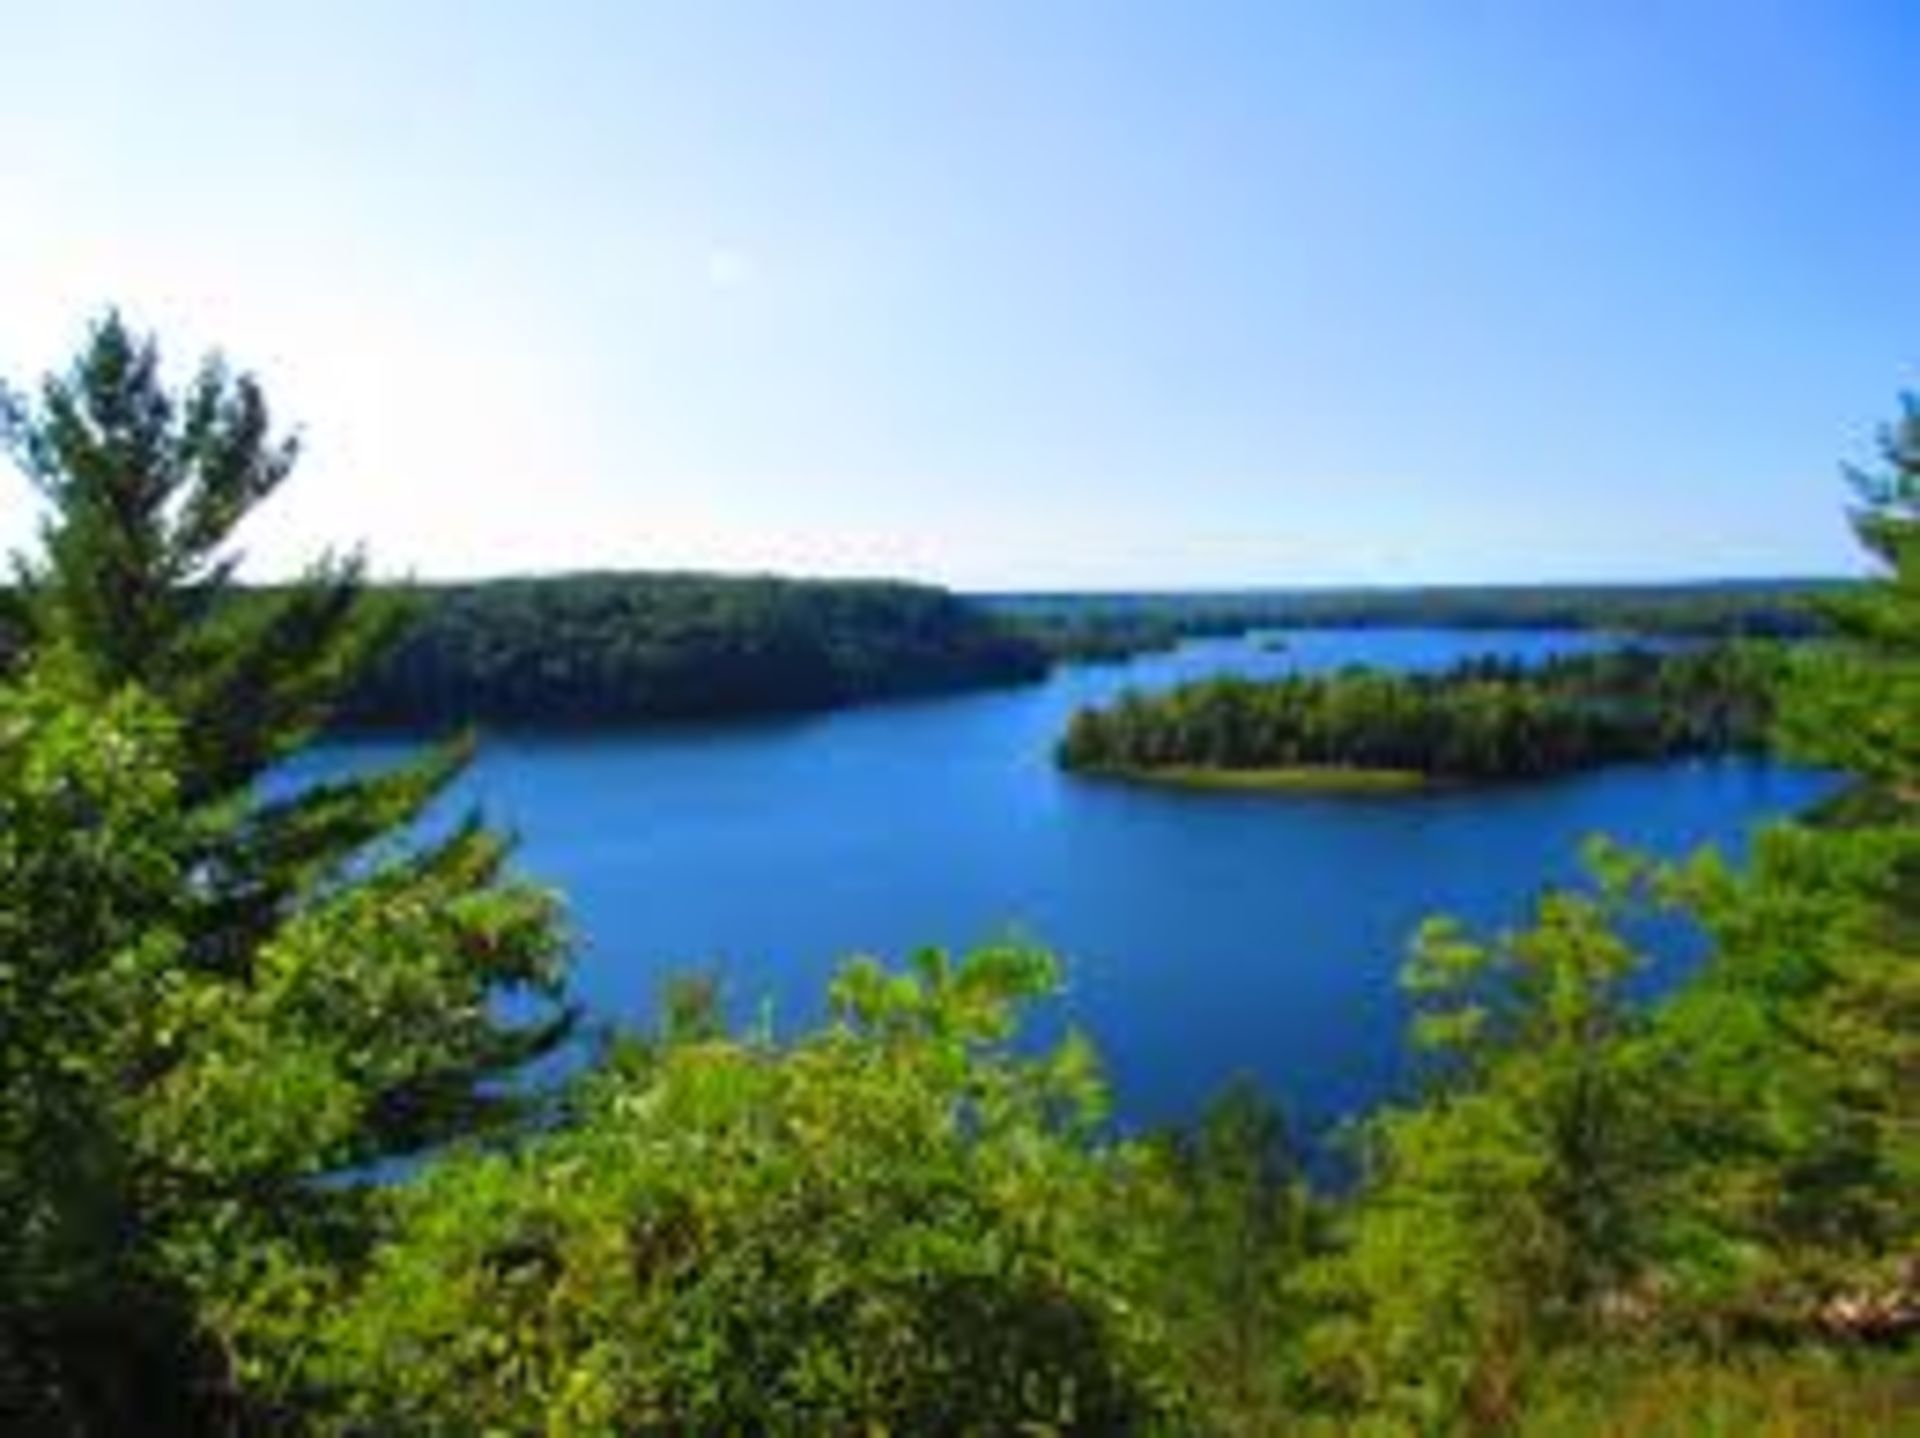 Own Land in Lake County, Michigan's Recreational Outdoor Paradise!